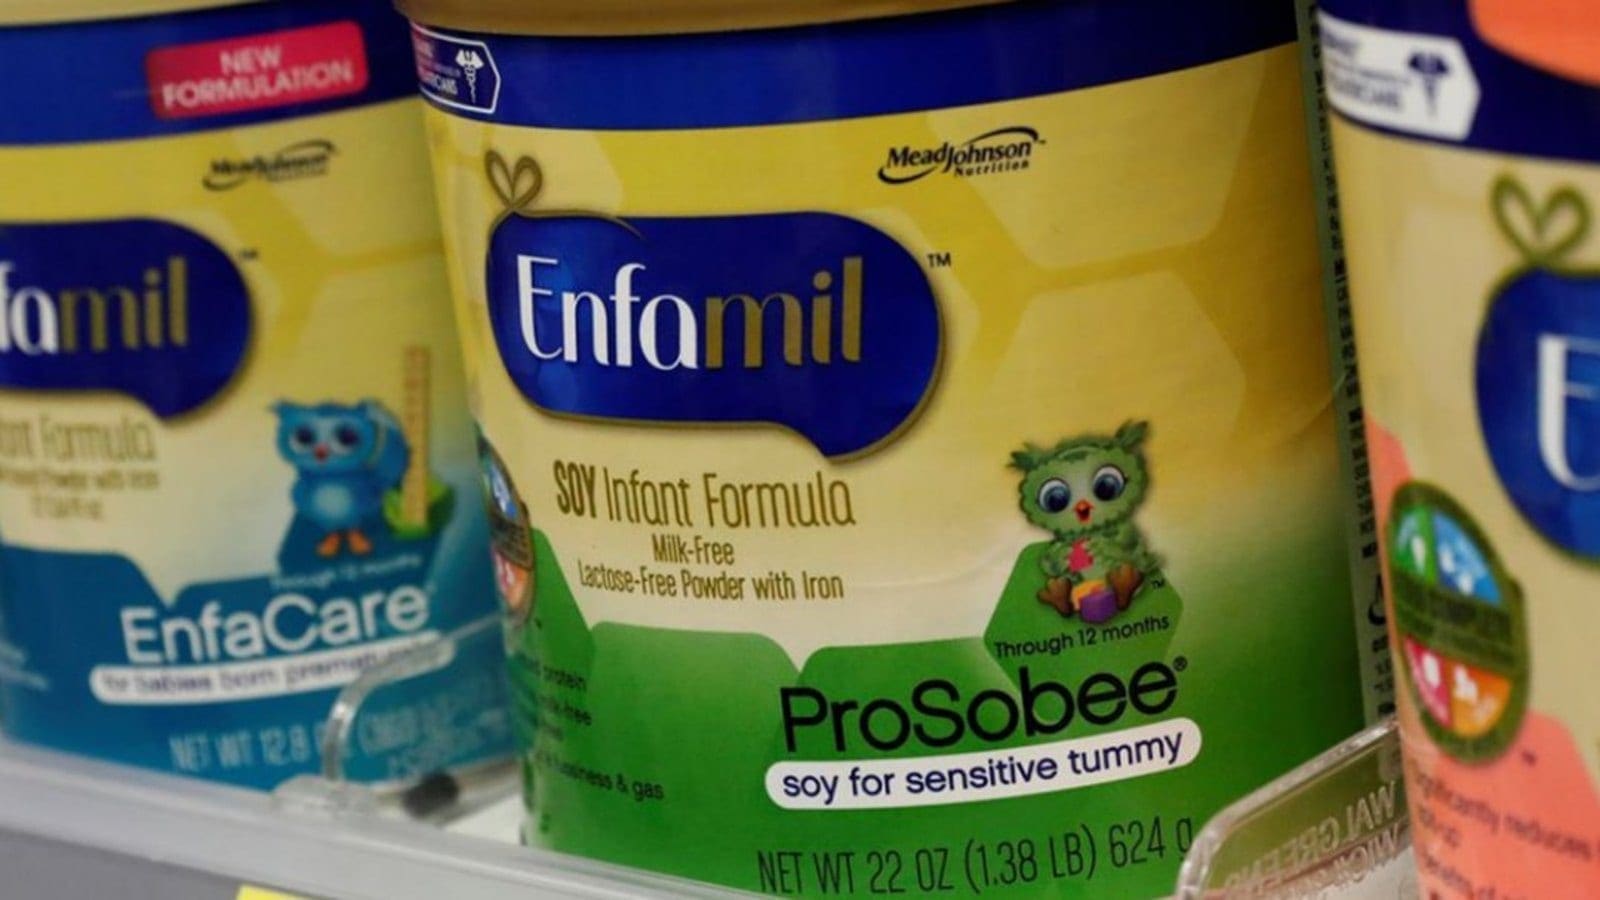 Reckitt Benckiser incurs US$3.05bn loss following sale underperforming China infant formula business